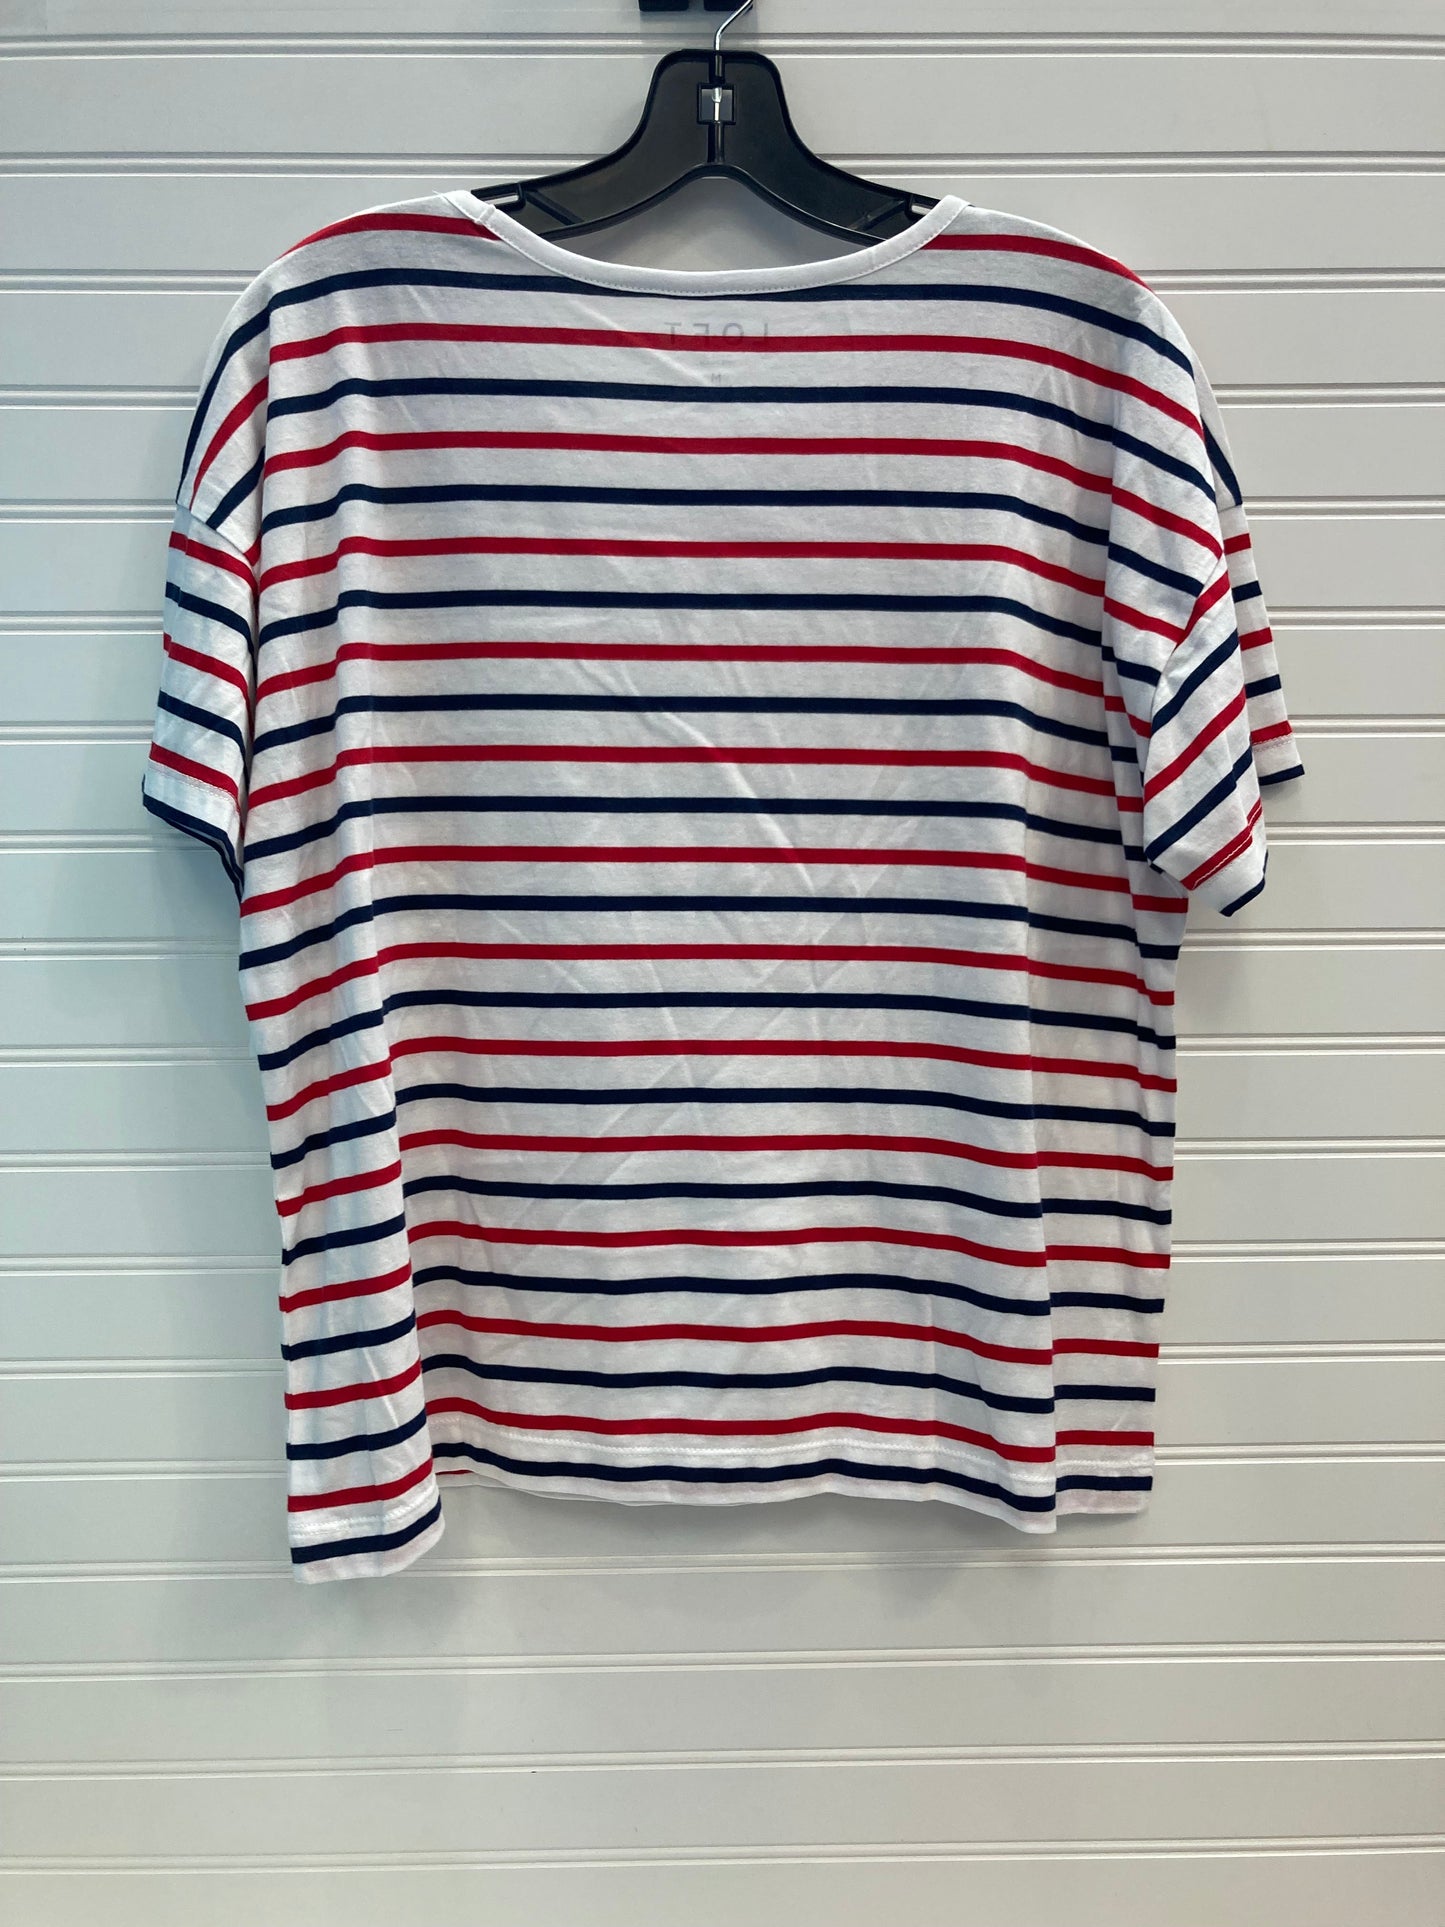 Blue & Red & White Top Short Sleeve Loft, Size M